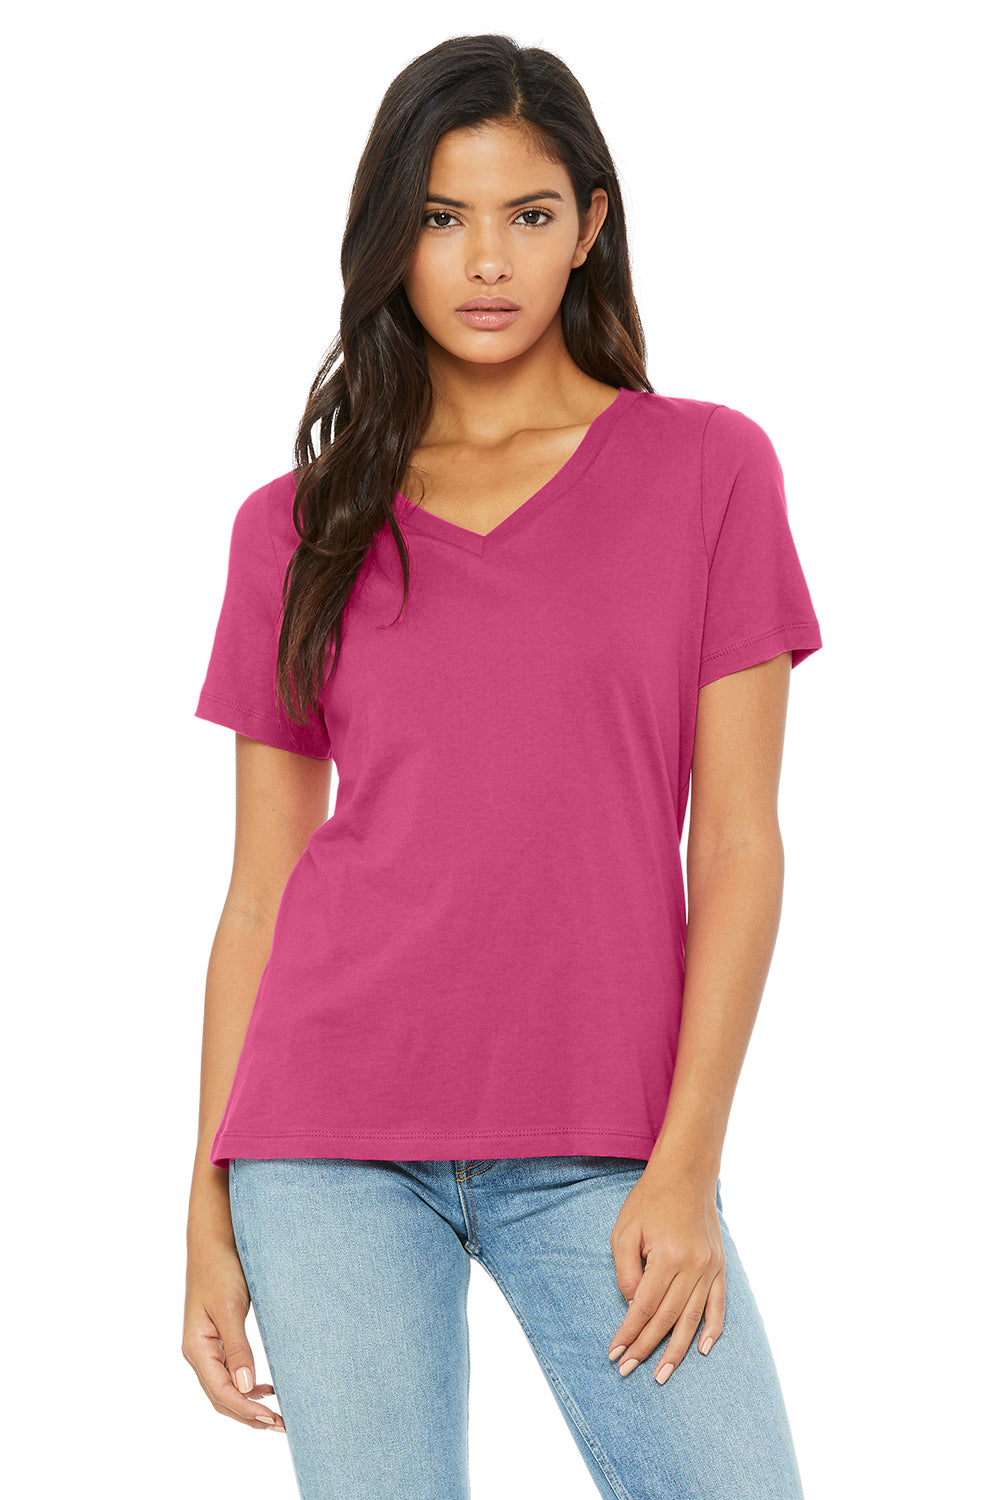 Bella + Canvas BC6405/6405 Womens Relaxed Jersey Short Sleeve V-Neck T-Shirt Berry Pink Model Front